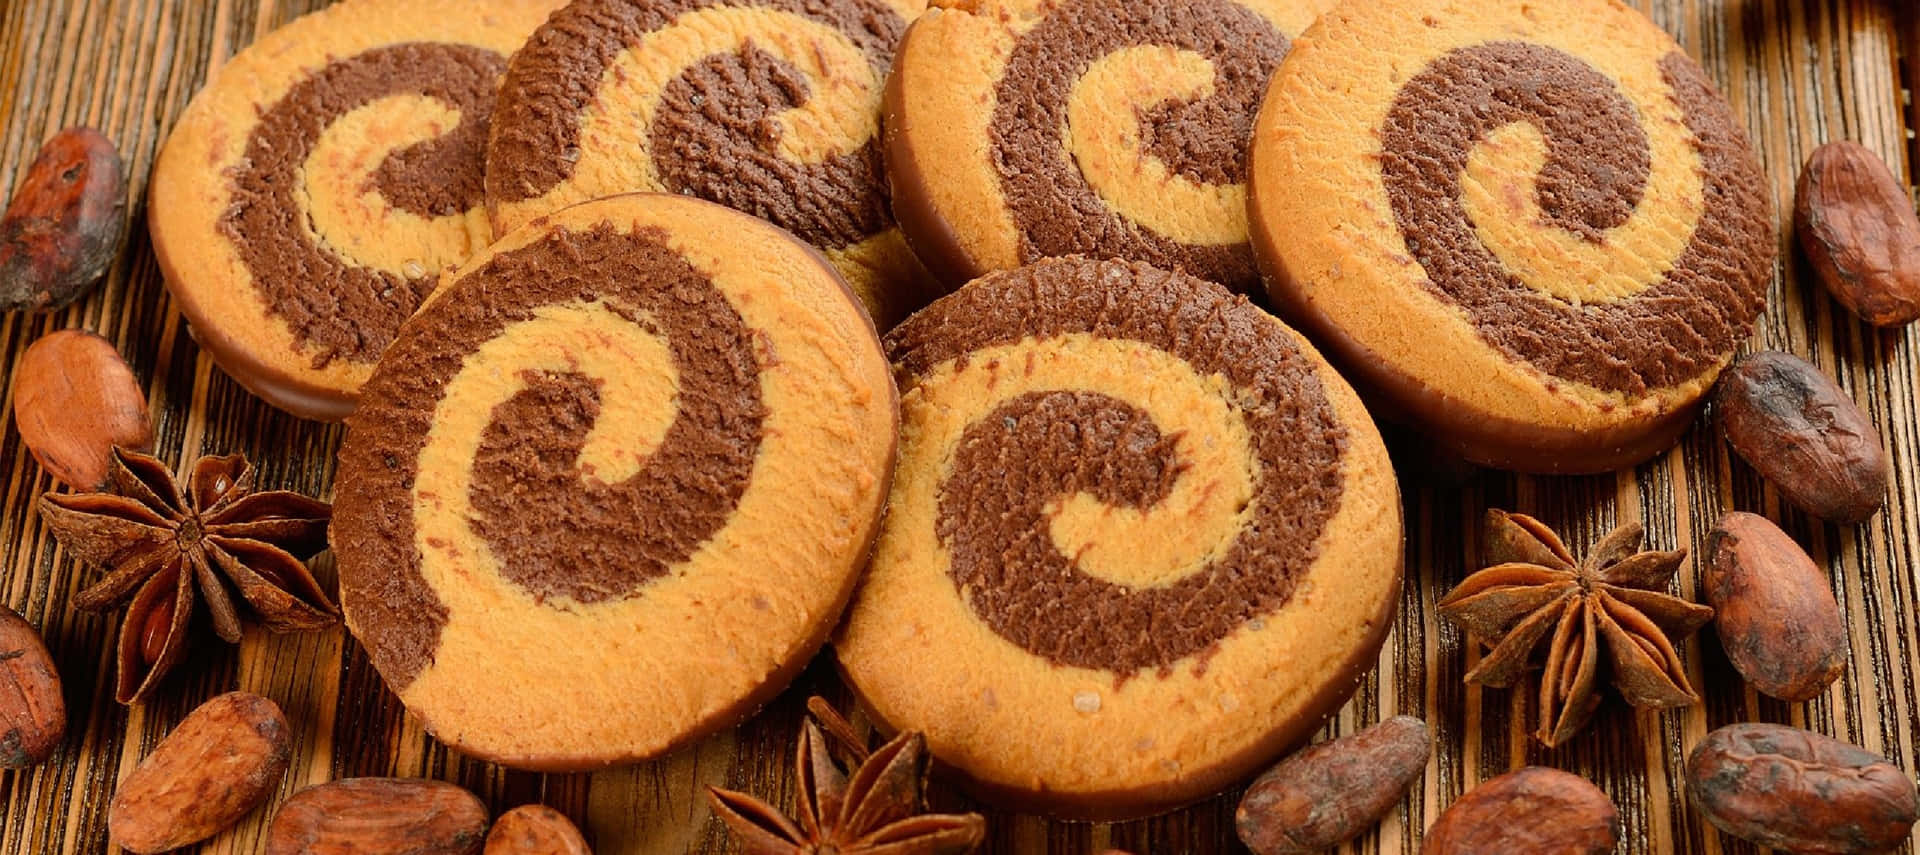 A Group Of Cookies With Swirls On Top